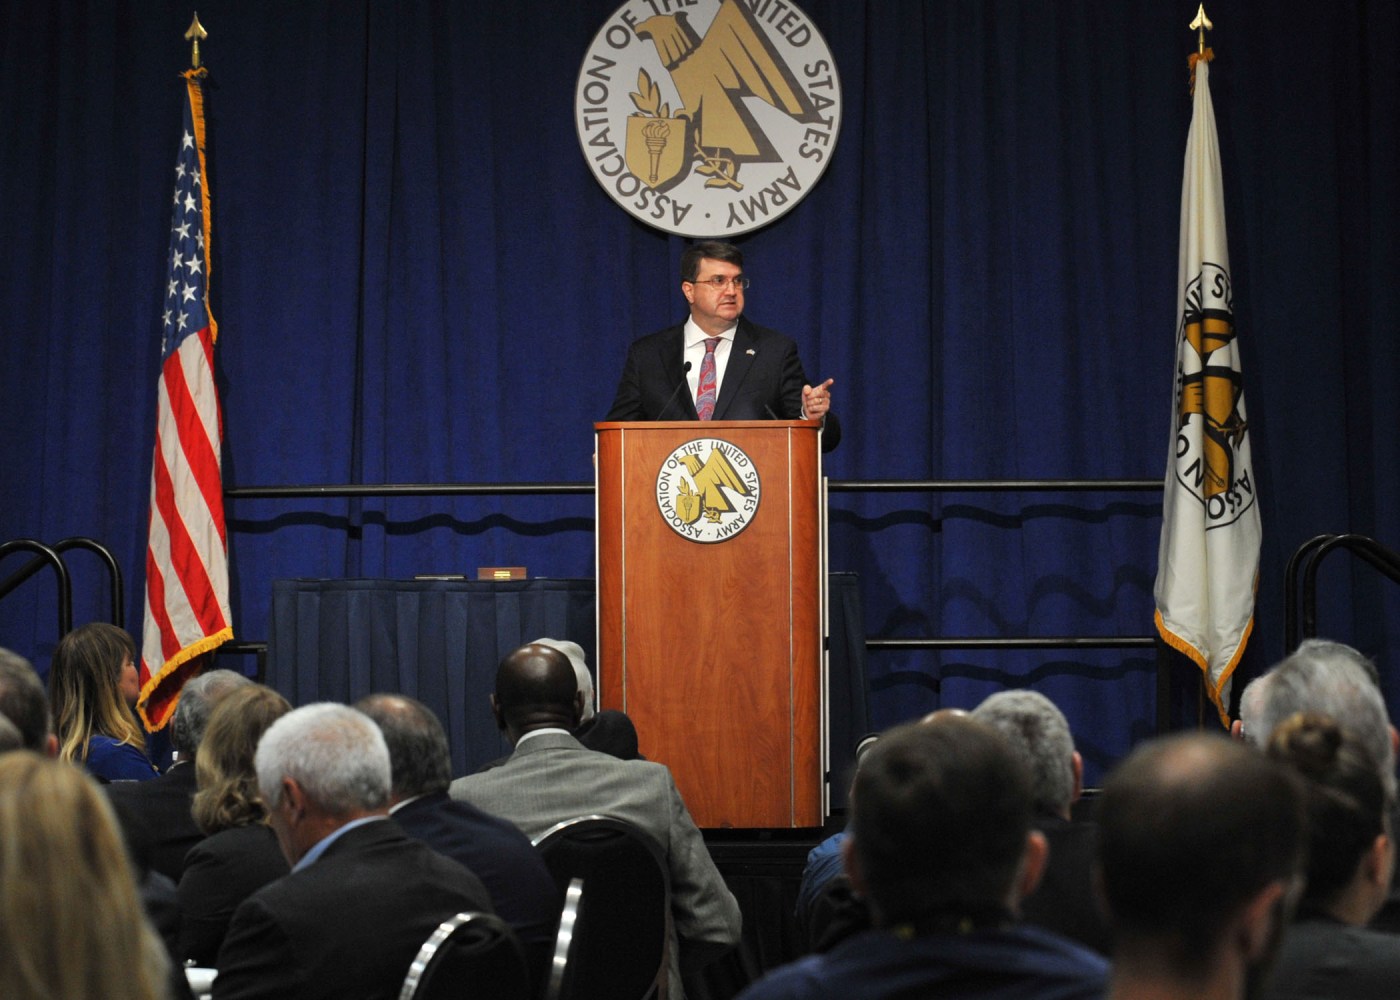 VA Secretary Robert Wilkie speaks at the Association of the United States Army conference Oct. 16, 2019.